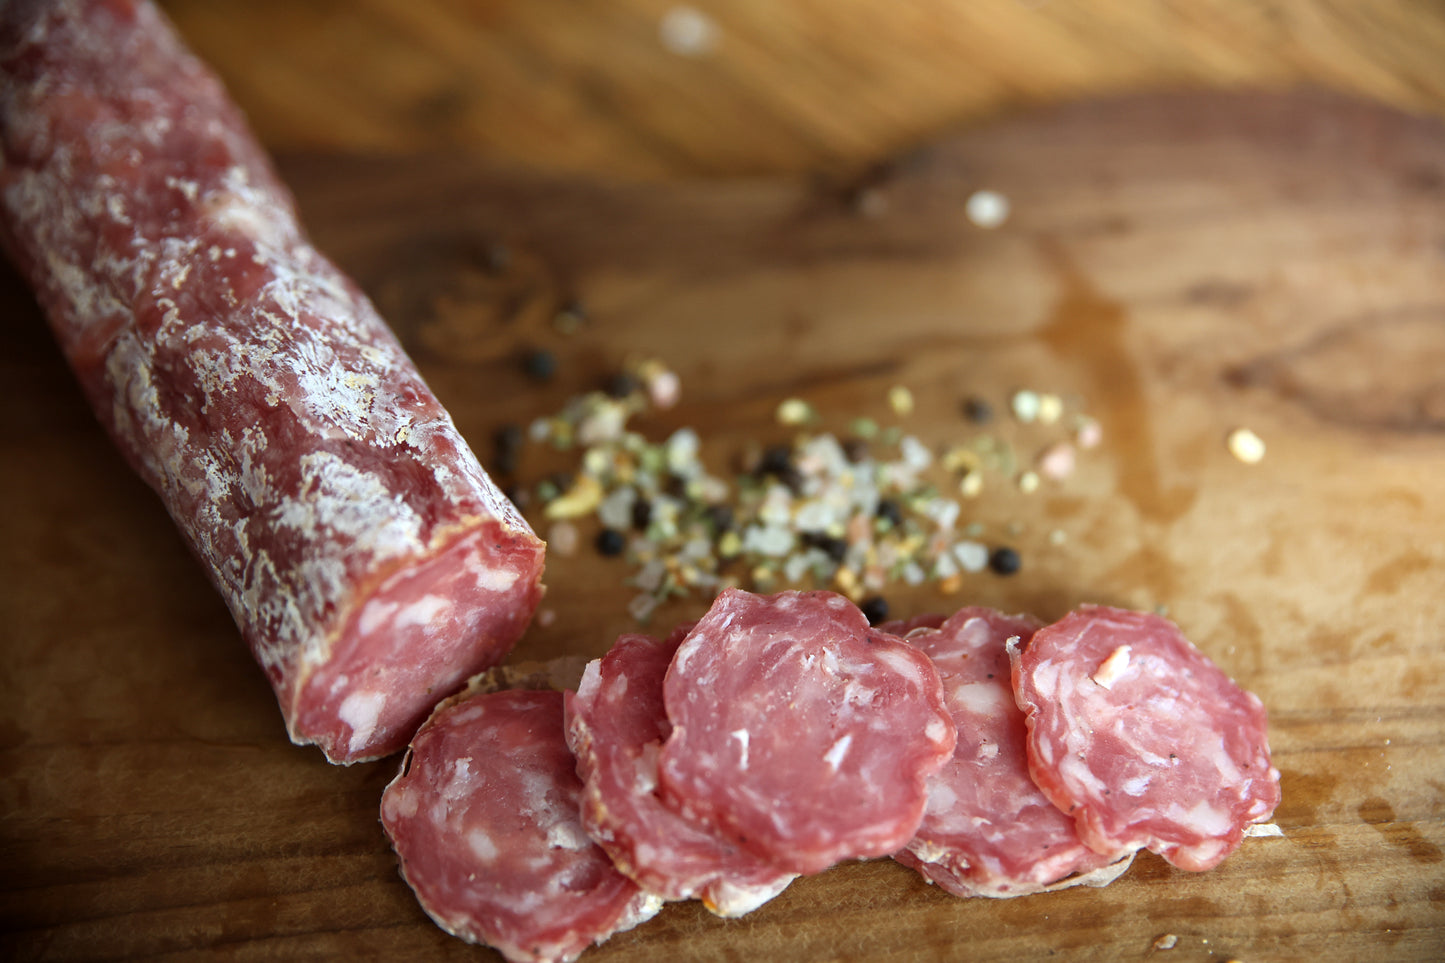 Truffle Salami Approx 320g random weight packet. Regular price $15.00 AUD [You are guaranteed to receive at least 300g of product, equivalent price of $50.00 per kg.]